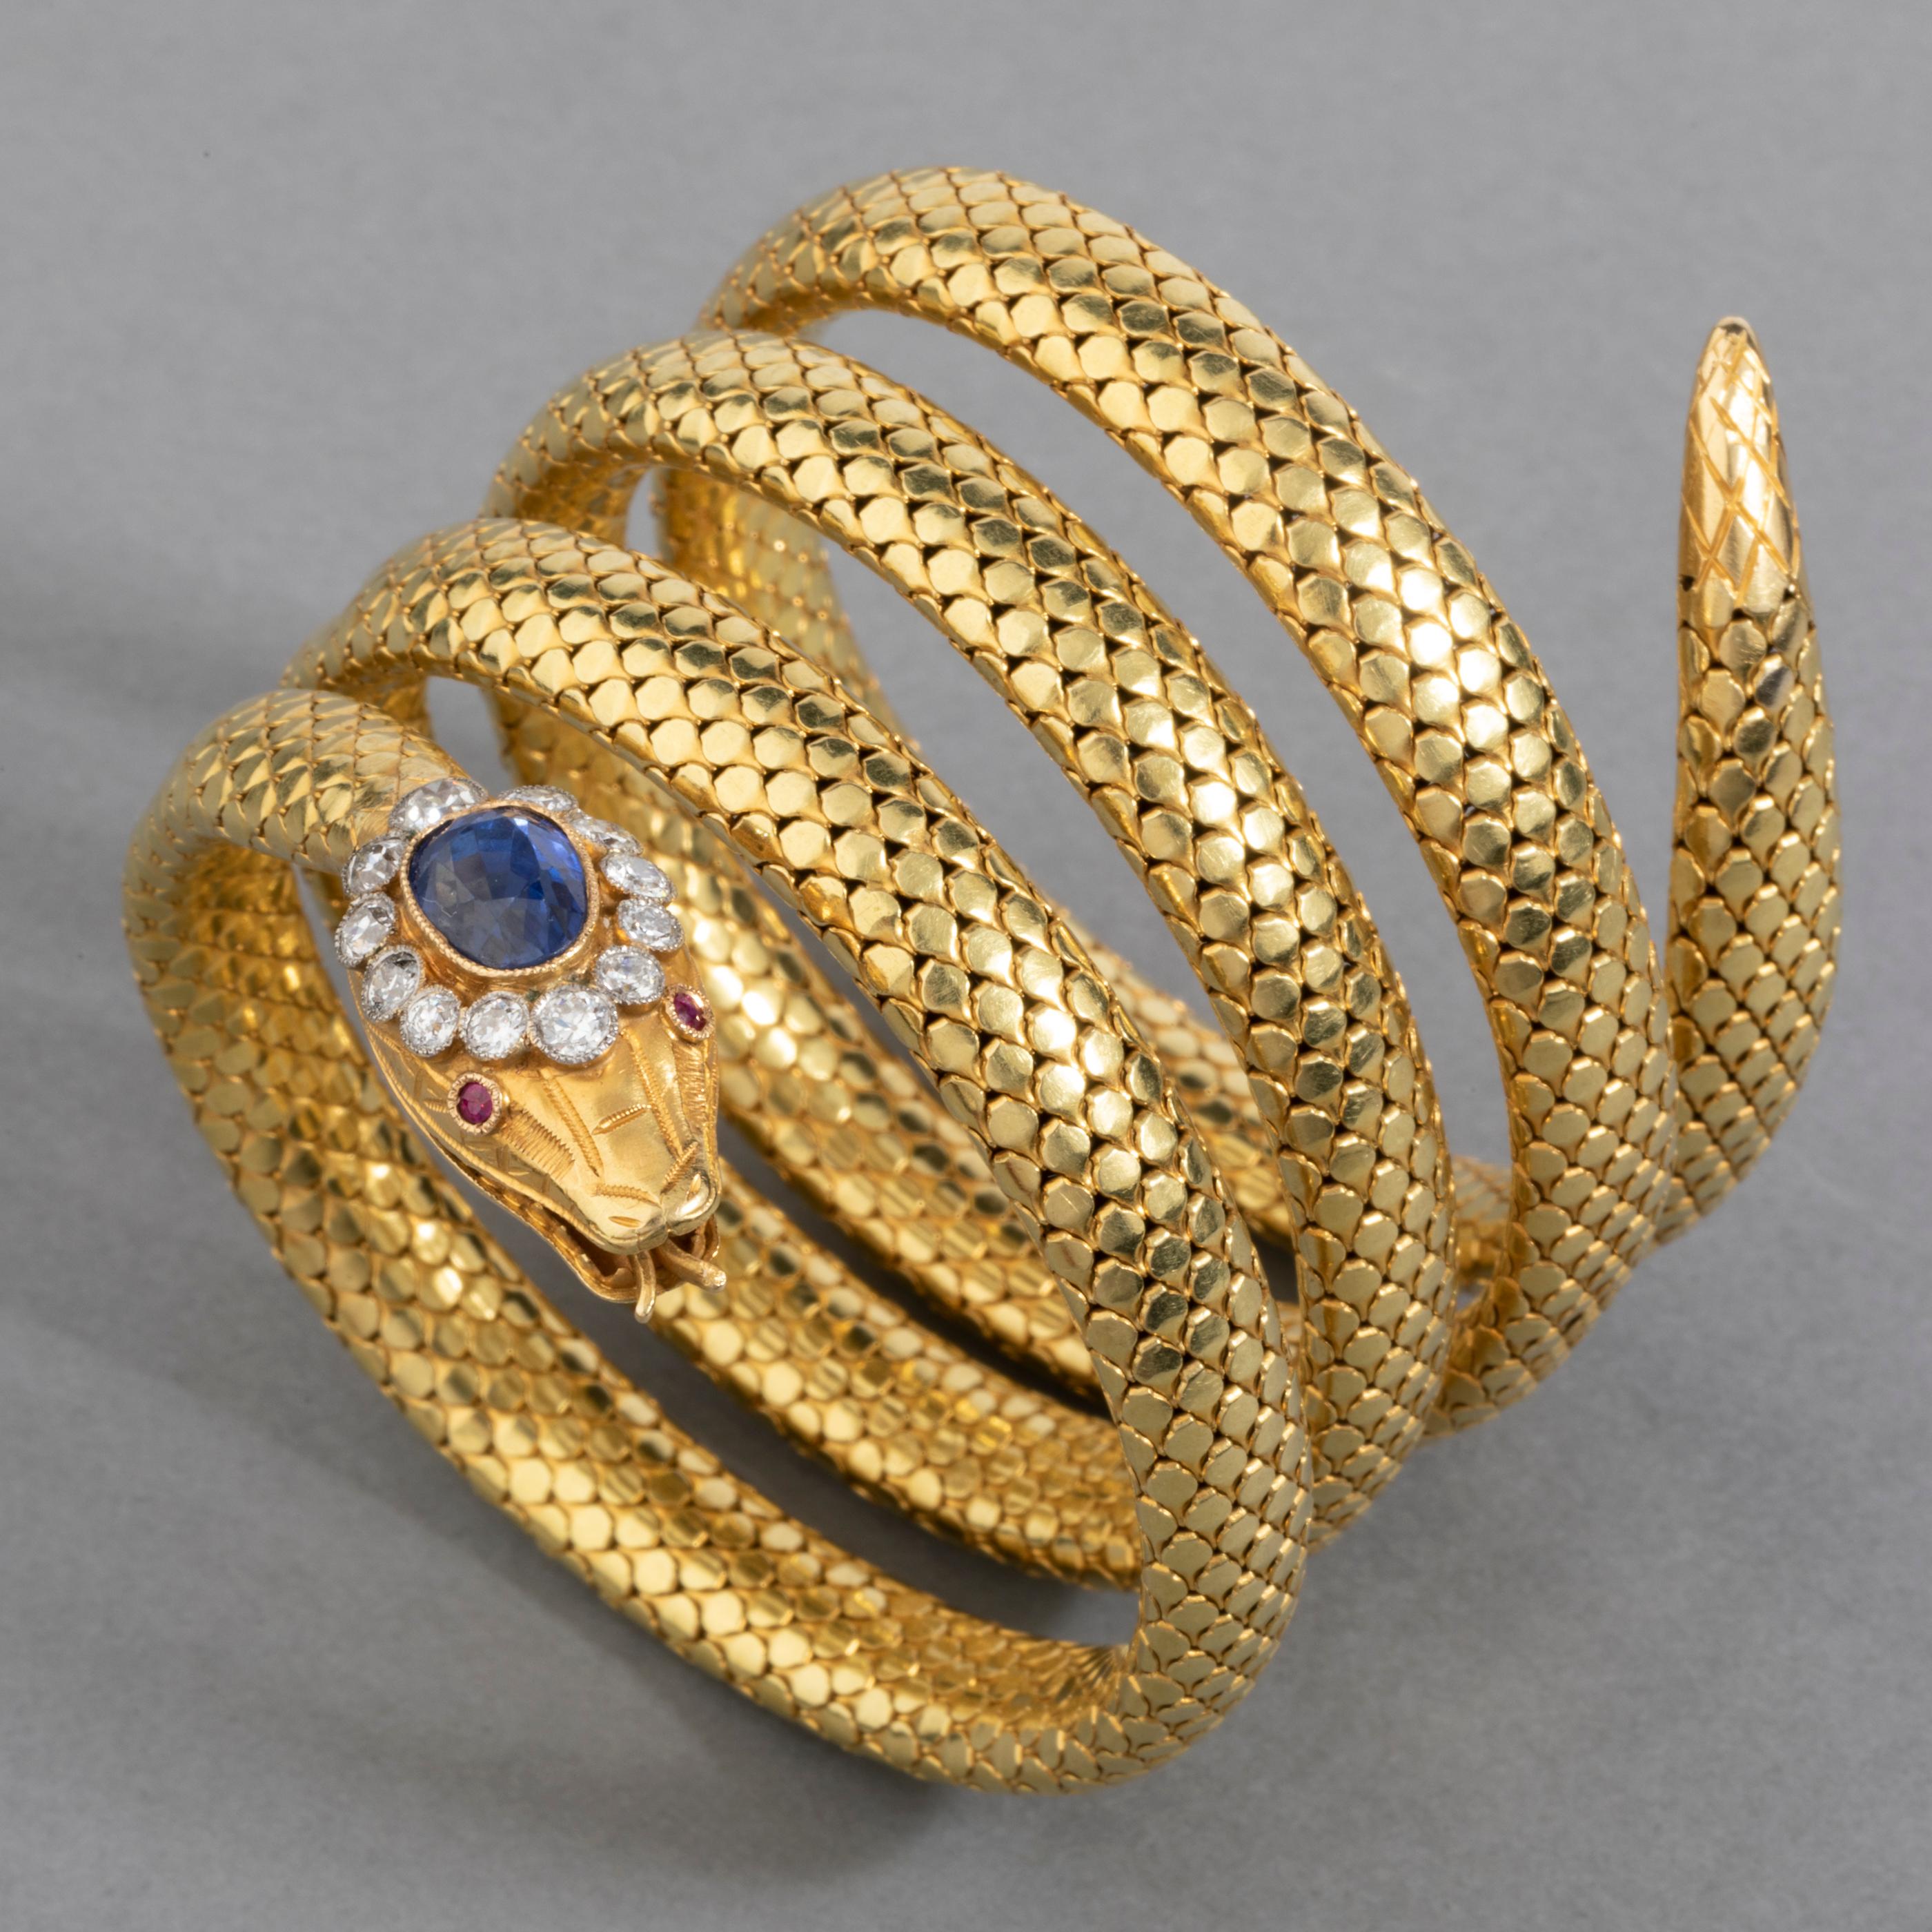 Gold Diamonds and Royal Blue Sapphire Antique Snake Bracelet

Very beautiful snake bracelet. Made in France circa 1880. 
Made in yellow gold 18k.
Two eagle head marks (gold 18k), mark of maker (Unknown), mark of Patent (certifié SGDG).
The Head of